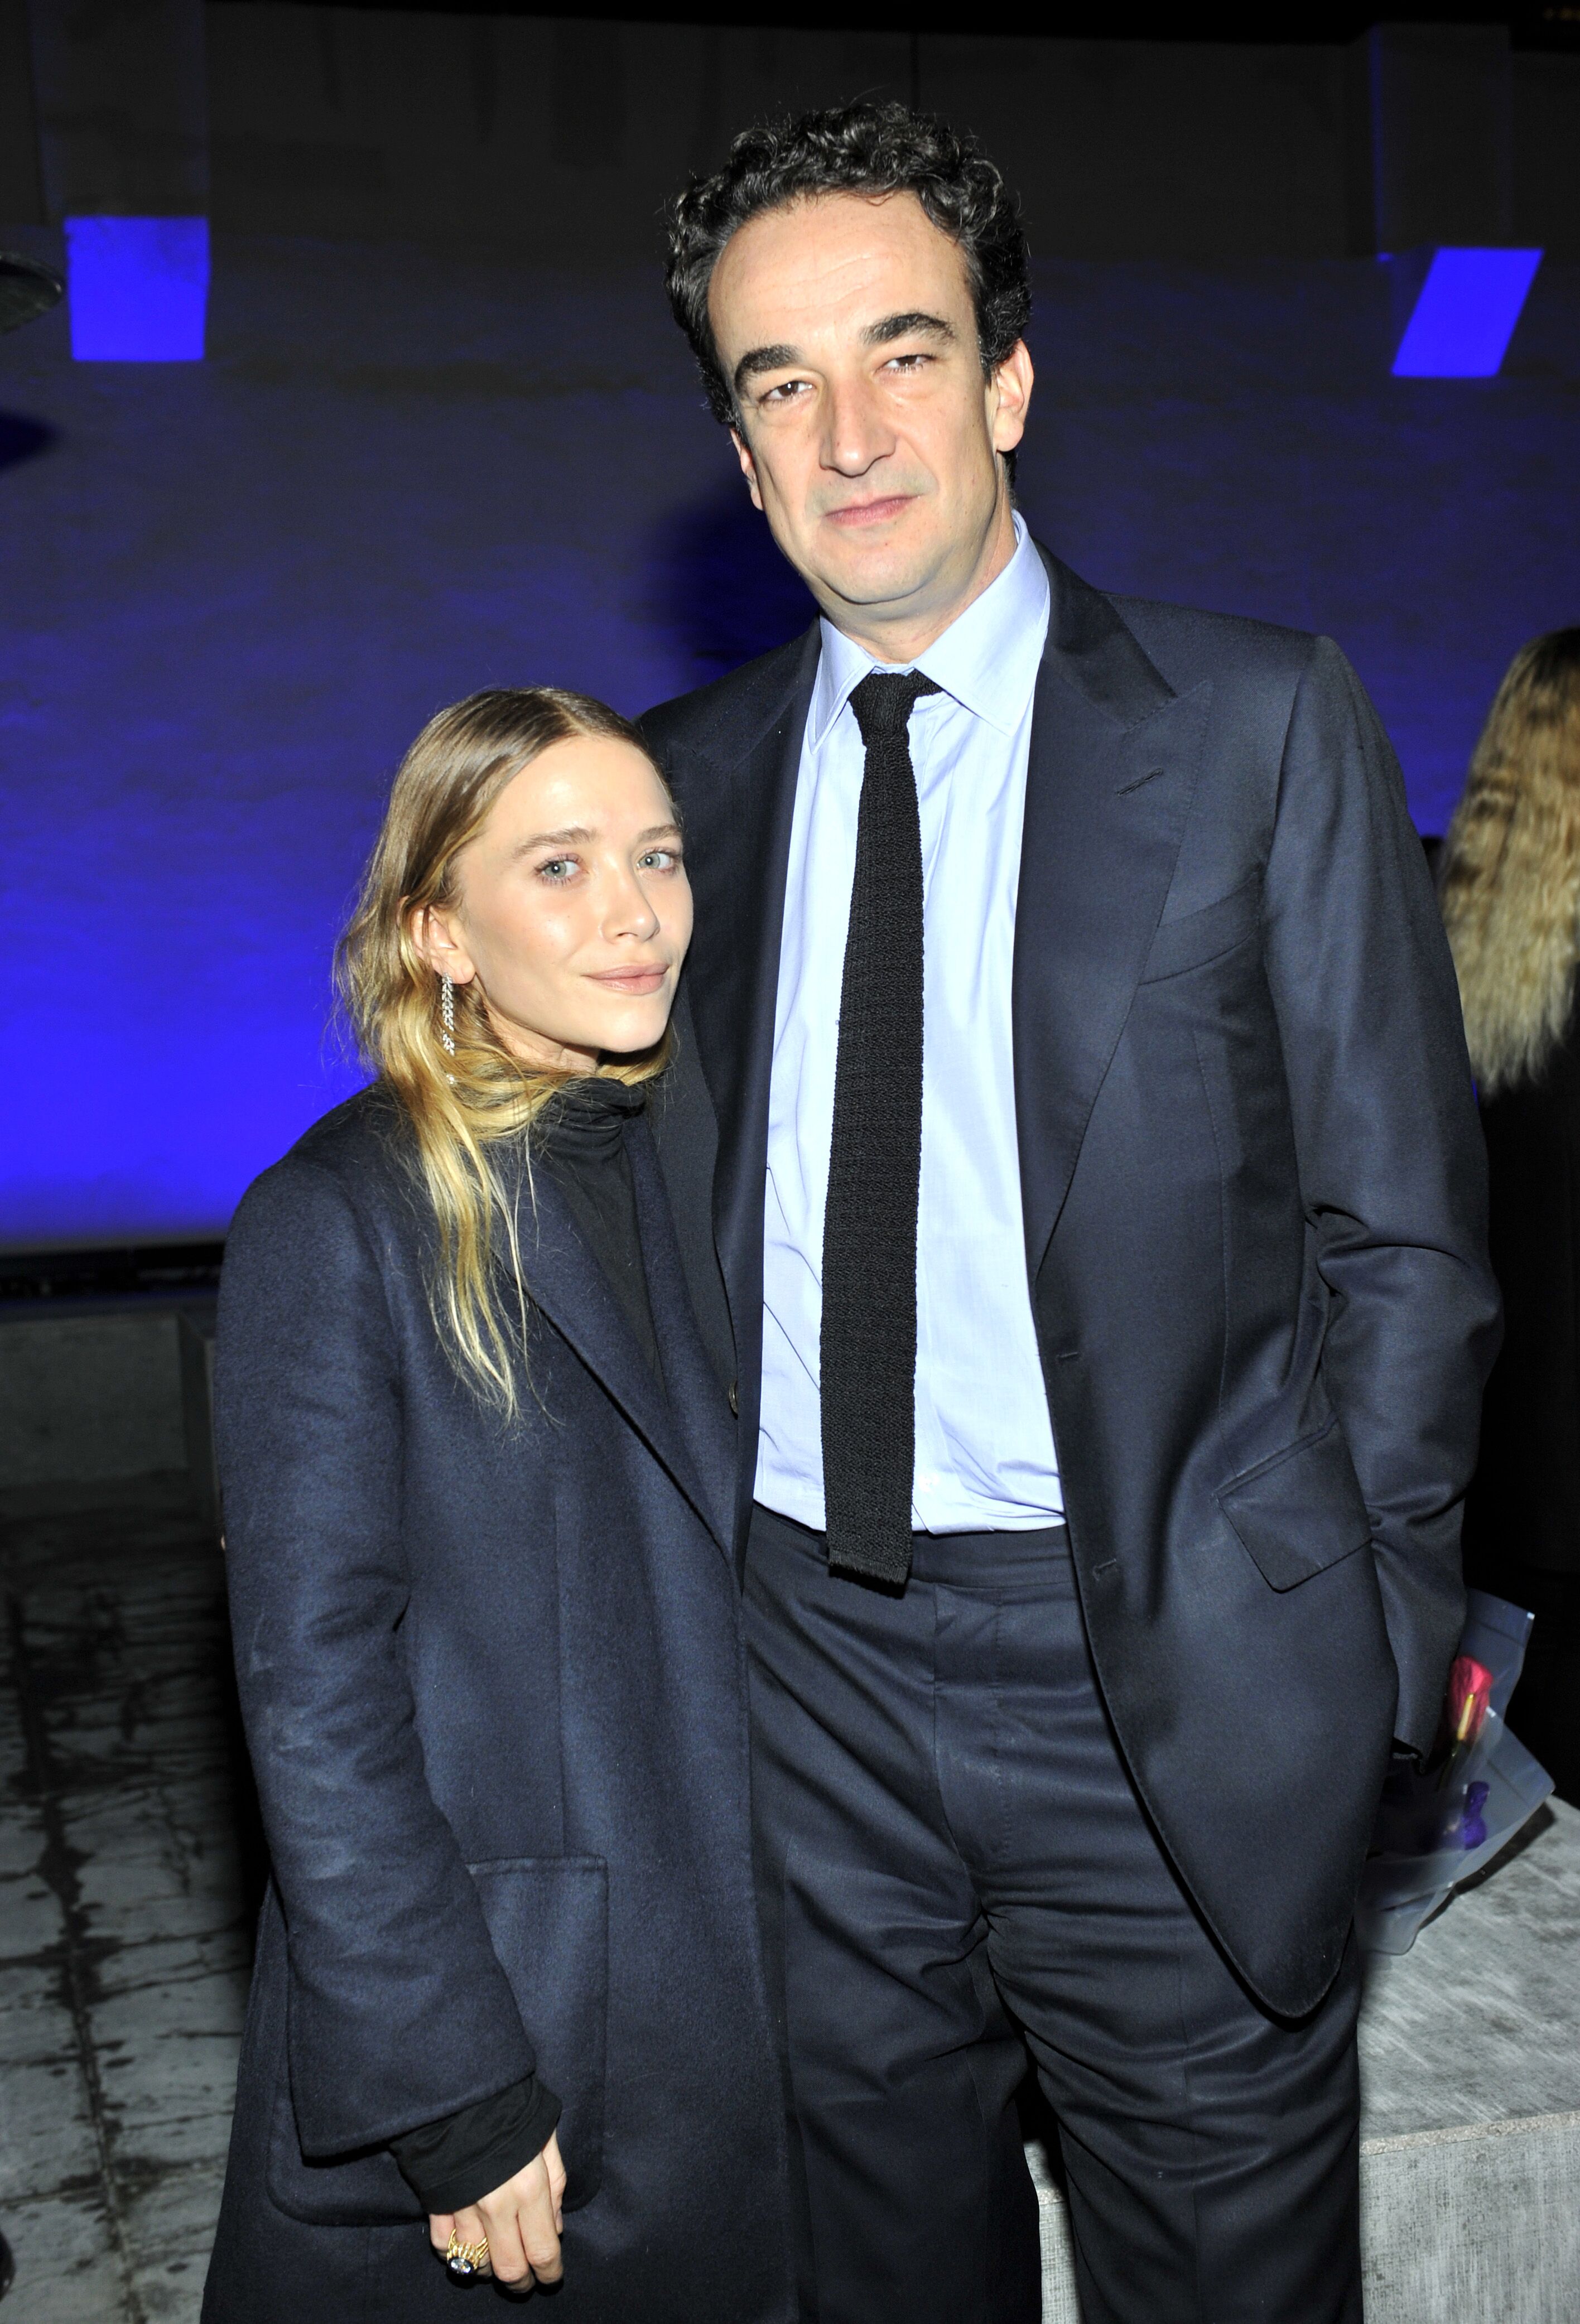 Mary-Kate Olsen and Olivier Sarkozy attend the launch of Just One Eye's Ulysses Tier 1 on December 5, 2014 in Los Angeles, California. | Photo: Getty Images